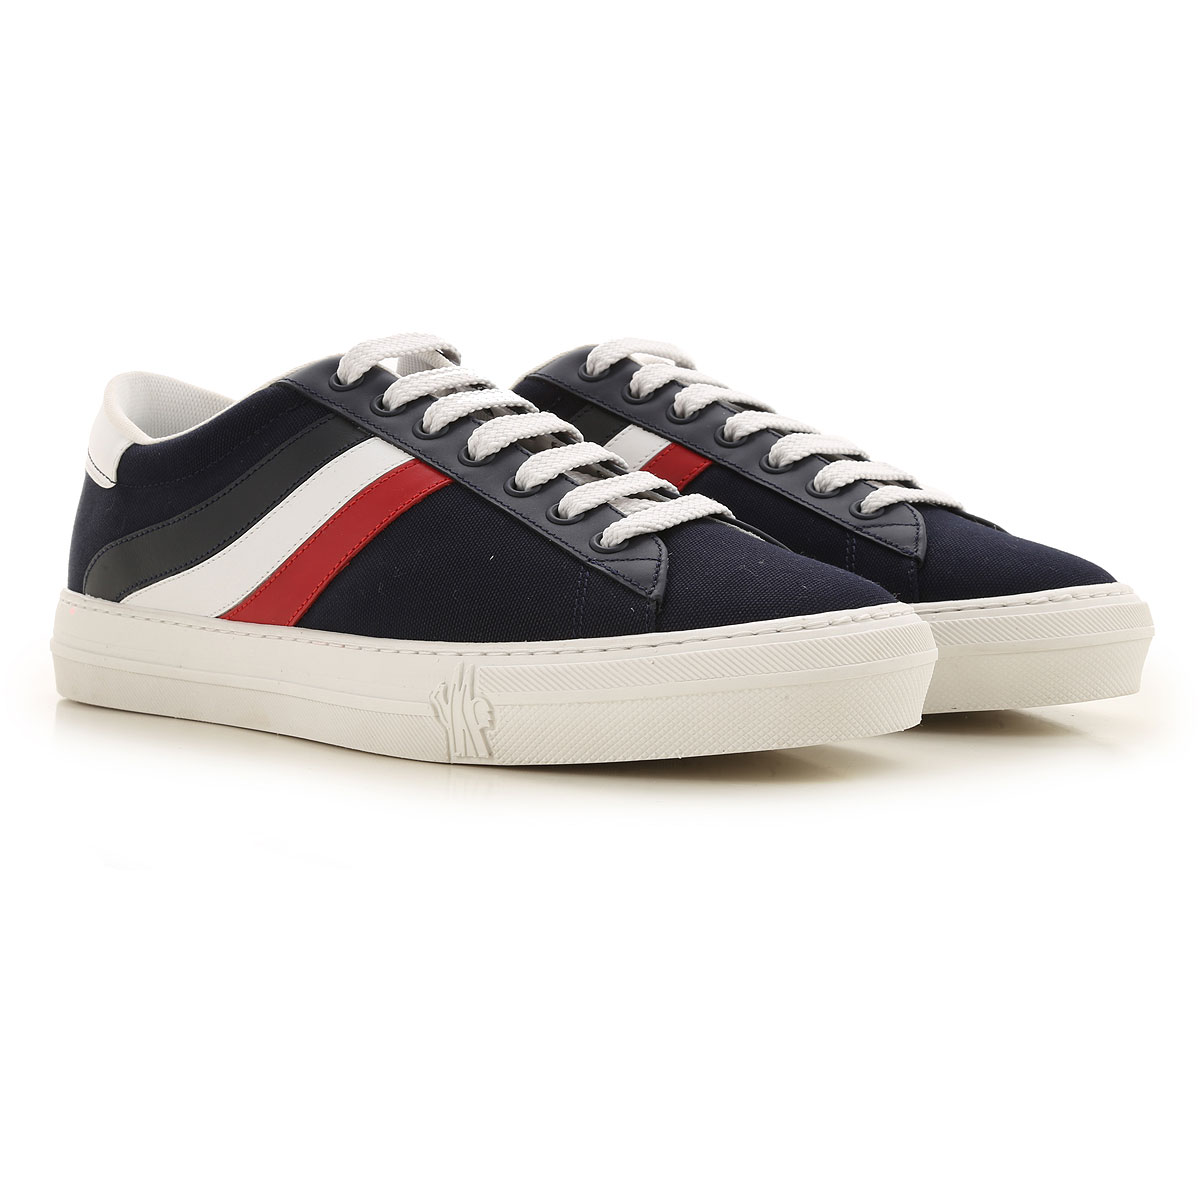 Mens Shoes Moncler, Style code: 103580001a94-778-